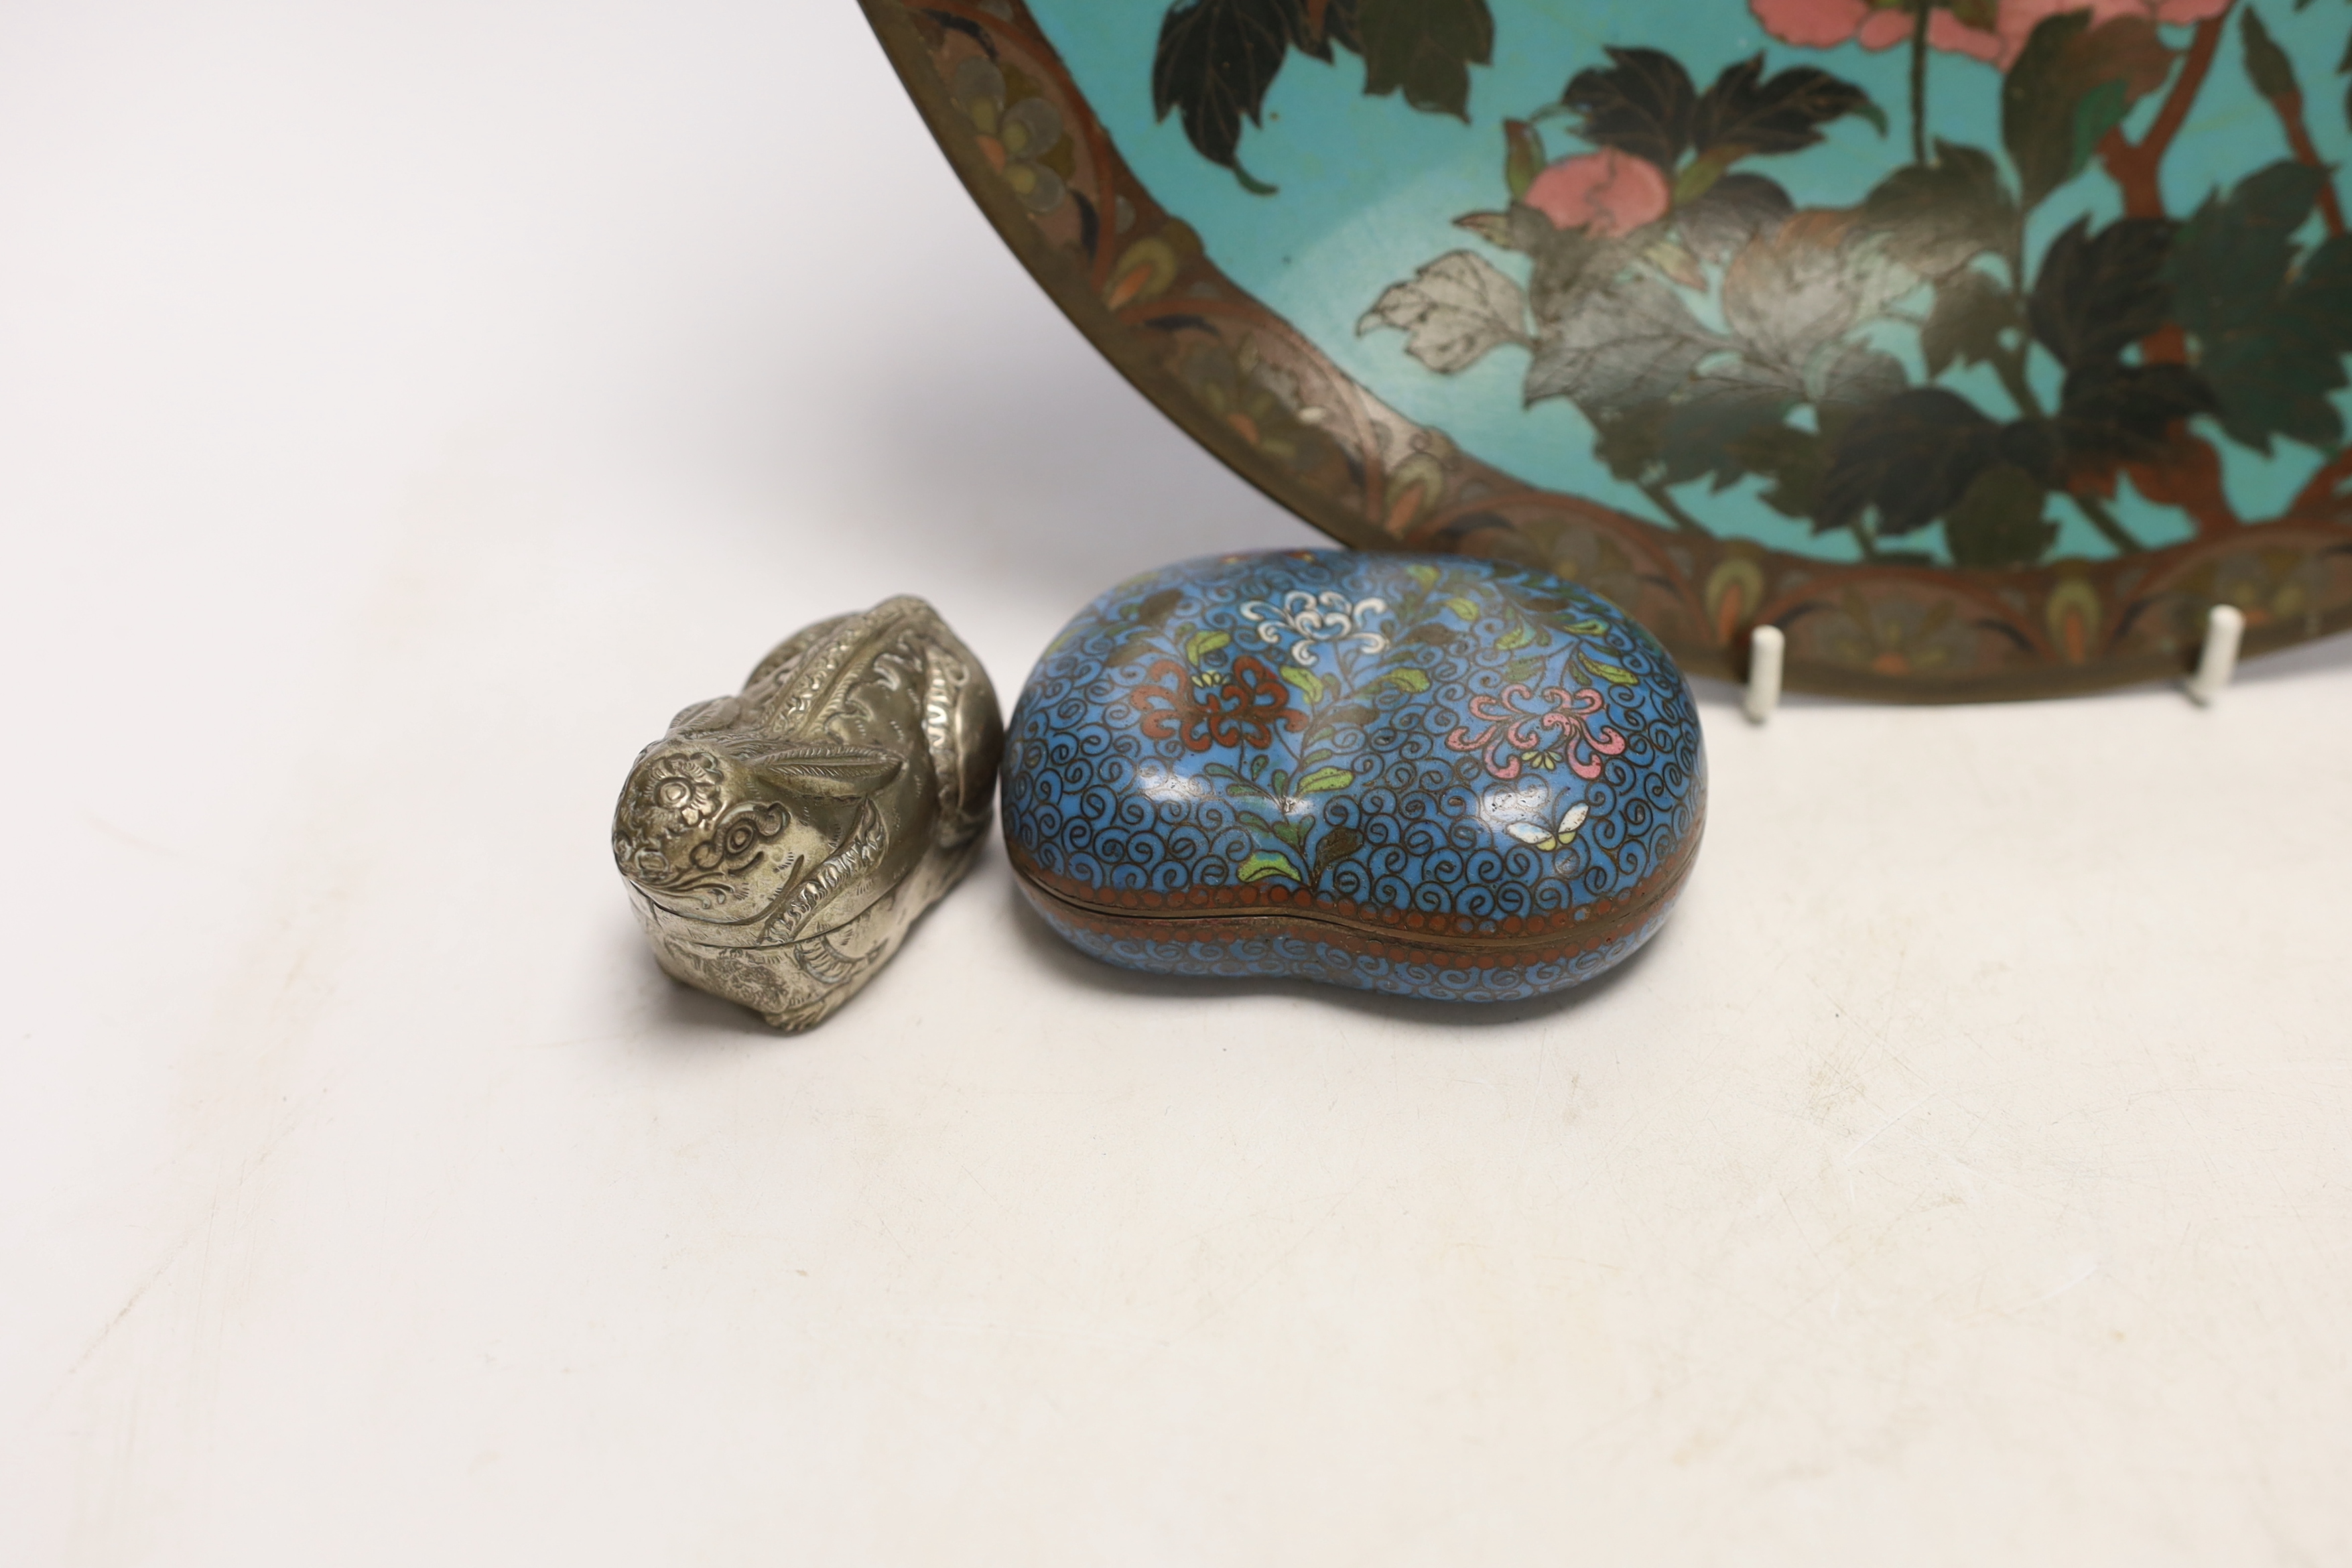 A Chinese cloisonné enamel kidney shaped box and cover, a pewter bottle and white metal ‘rabbit’ box and cover, and a Japanese cloisonné enamel dish, largest 30cm in diameter